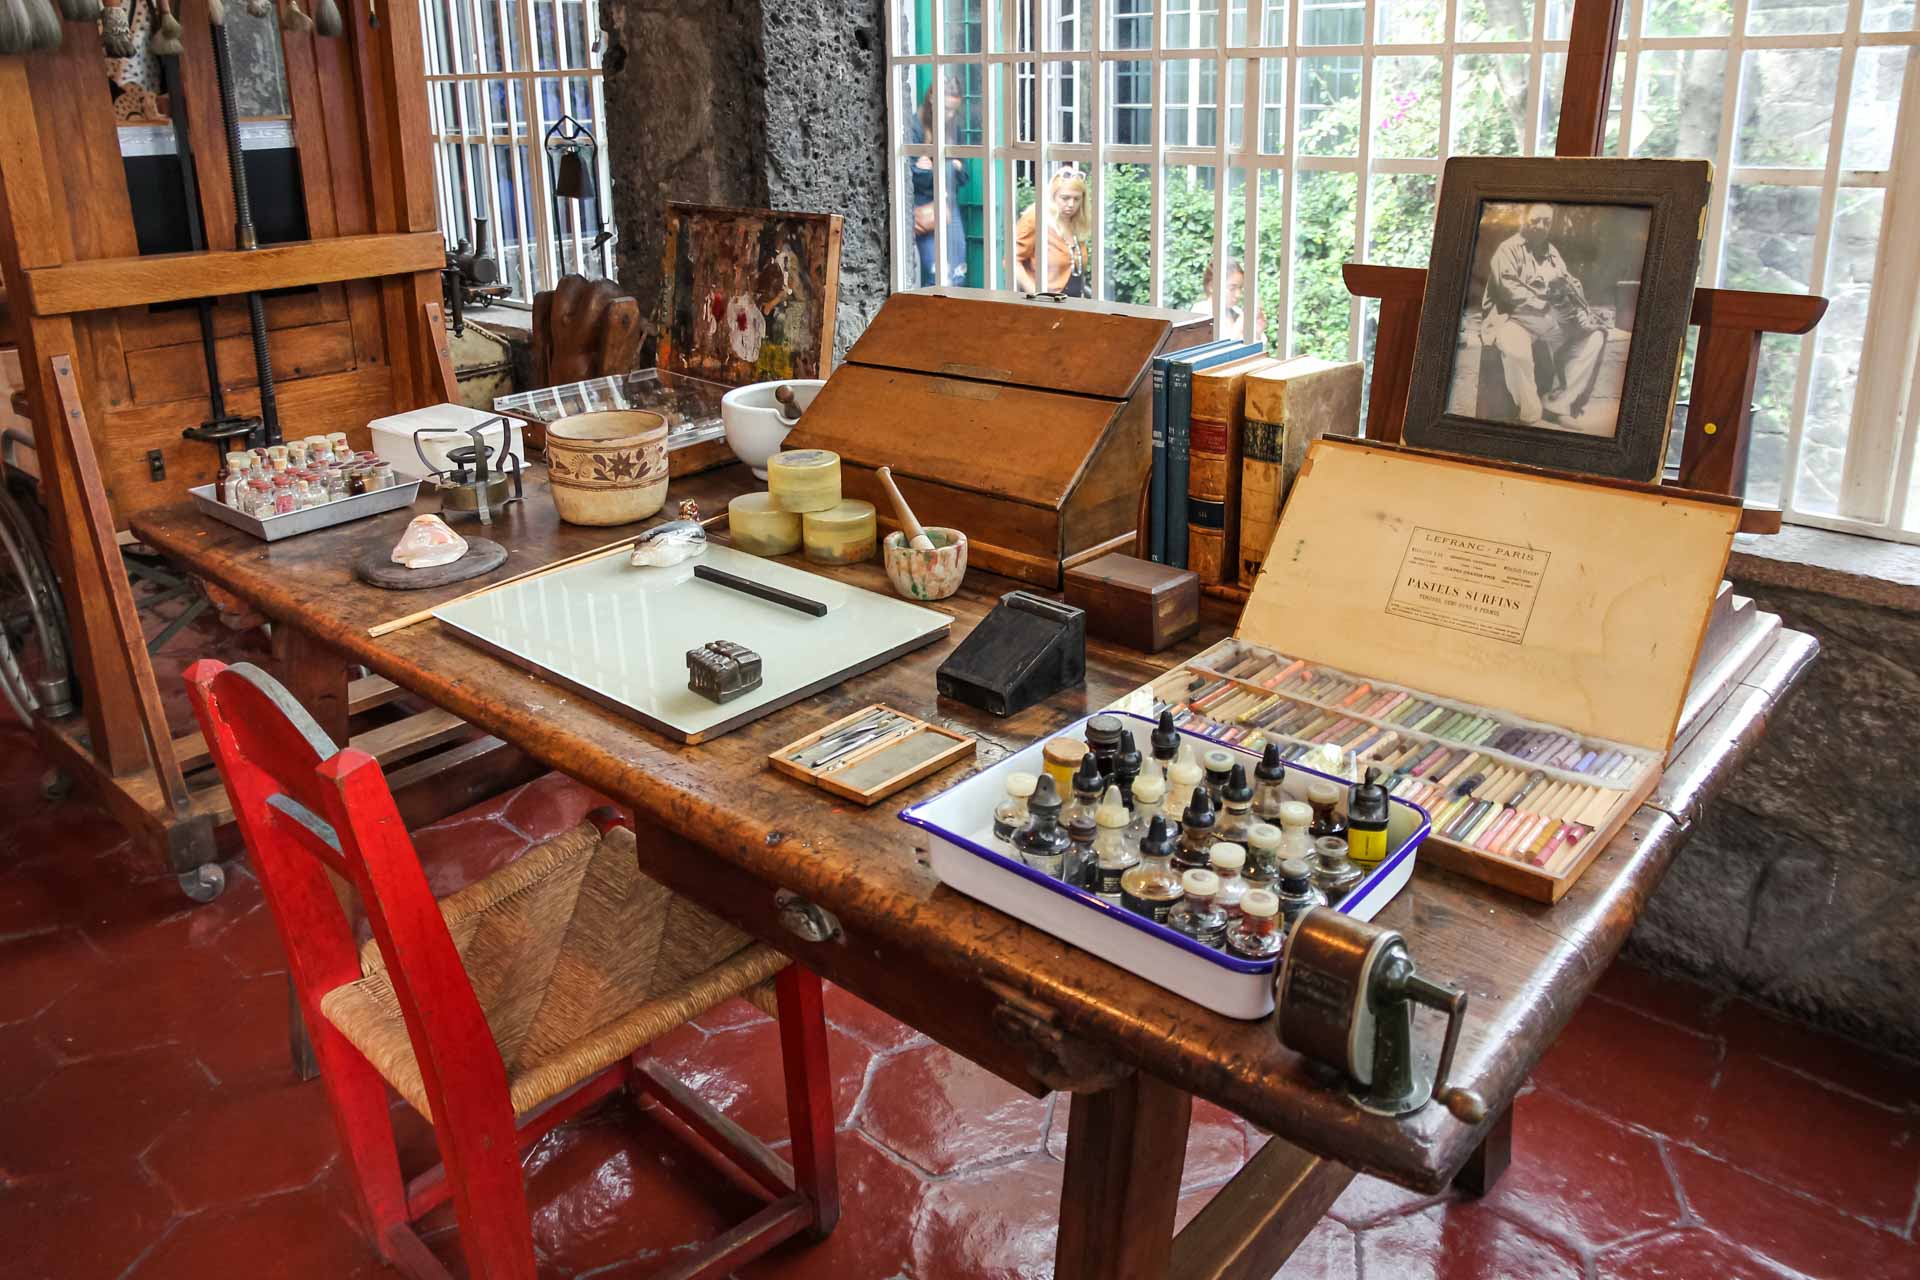 Frida Kahlo's studio at The Blue House with paints and pastels on a wooden desk, with a framed portrait of Diego Rivera